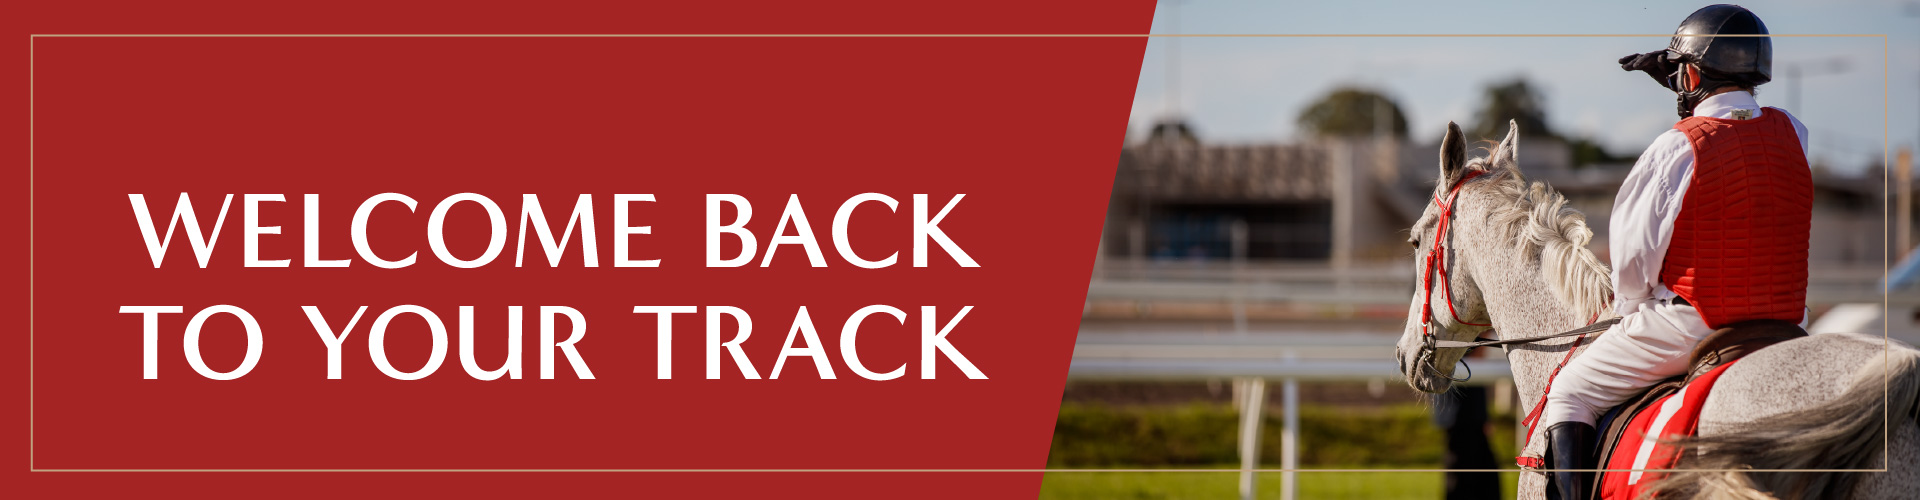 Welcome back to your track | Brisbane Racing Club 